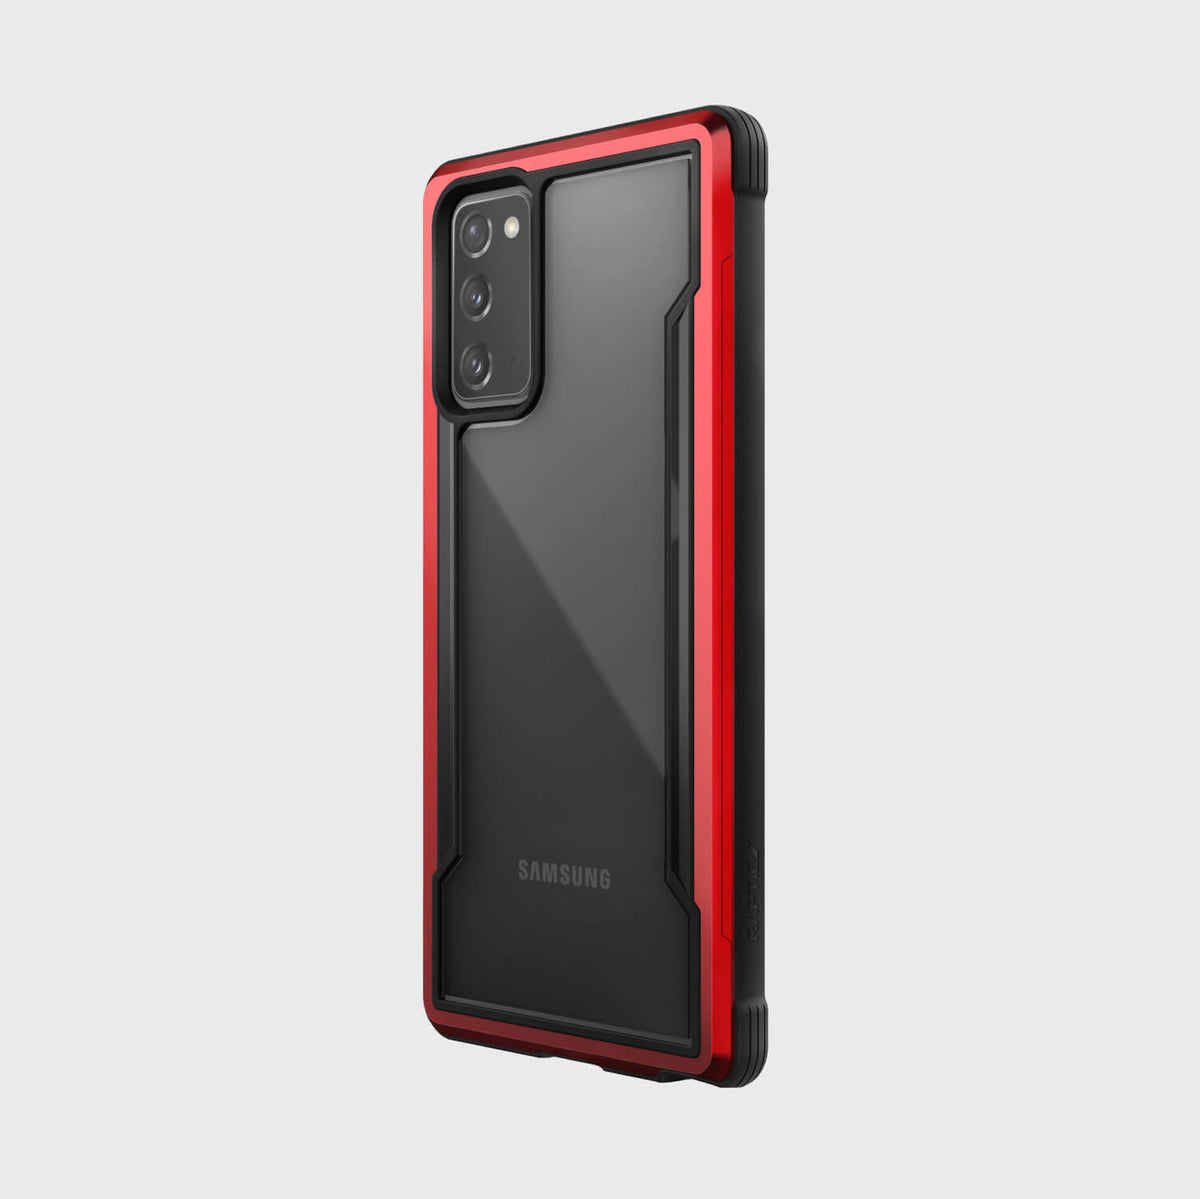 The back view of the X-Doria Samsung Galaxy Note 20 Case - SHIELD Red, offering military-grade drop protection against drops on concrete.